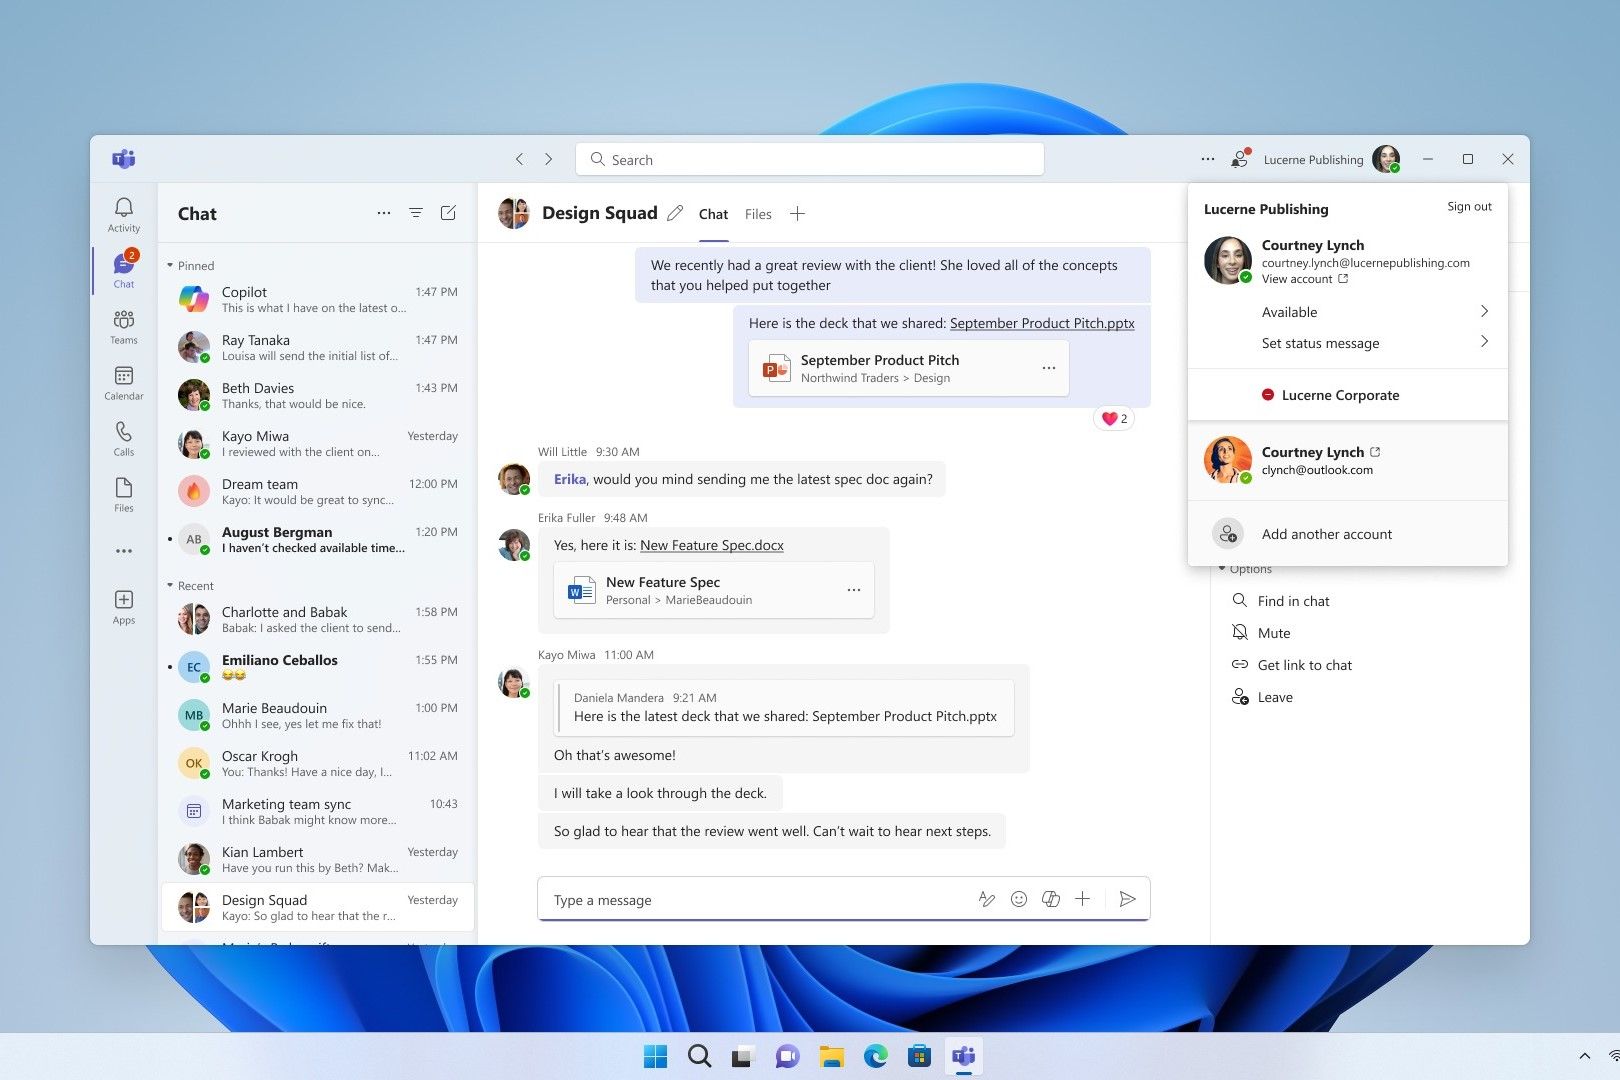 Microsoft Teams becomes a whole lot better with new features, more enhancements on the horizon